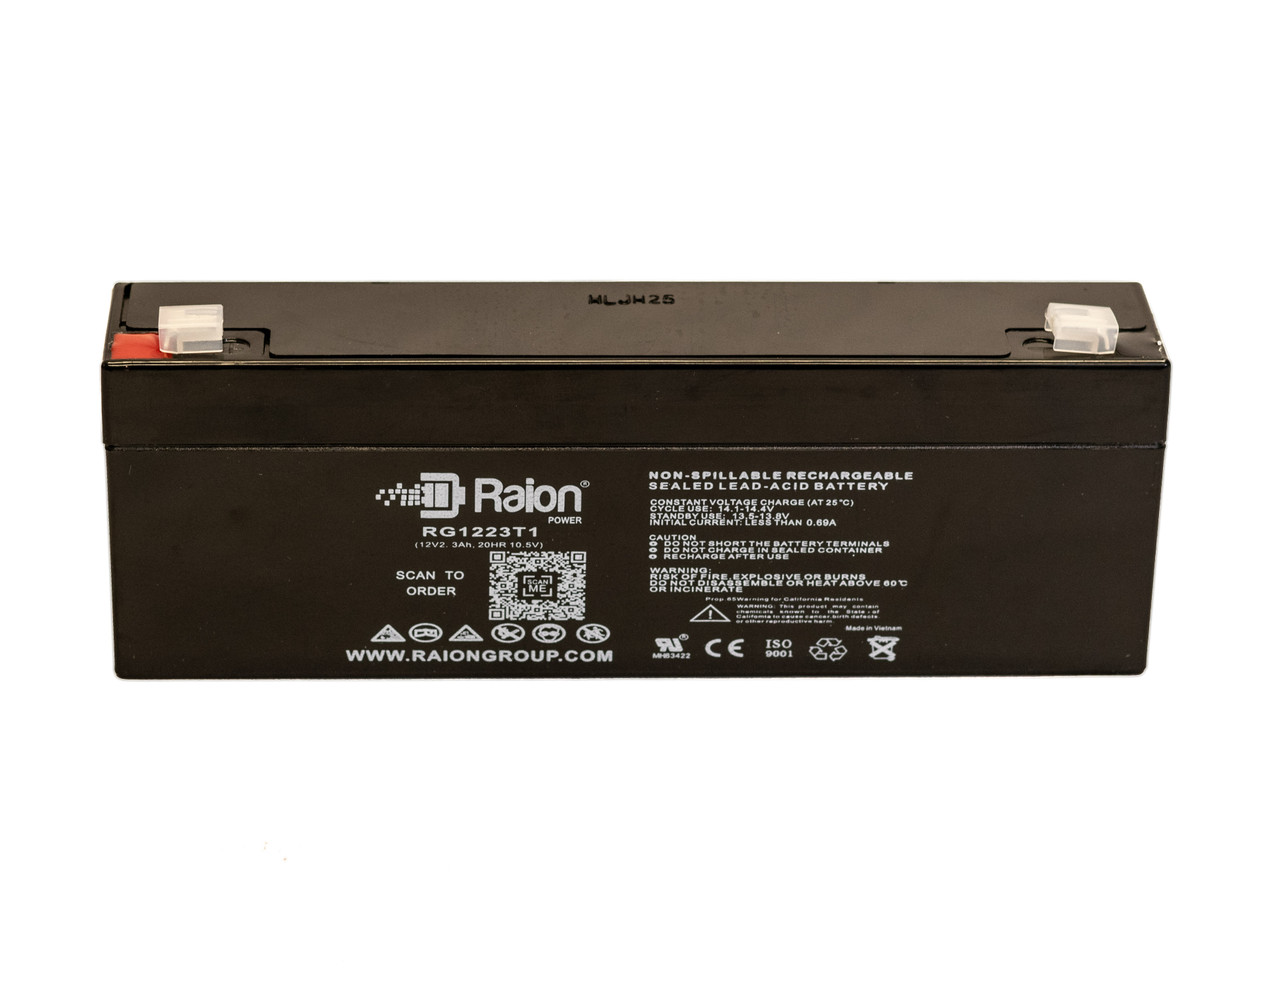 Raion Power 12V 2.3Ah SLA Battery With T1 Terminals For Baxter Healthcare 5D Infusion Pump